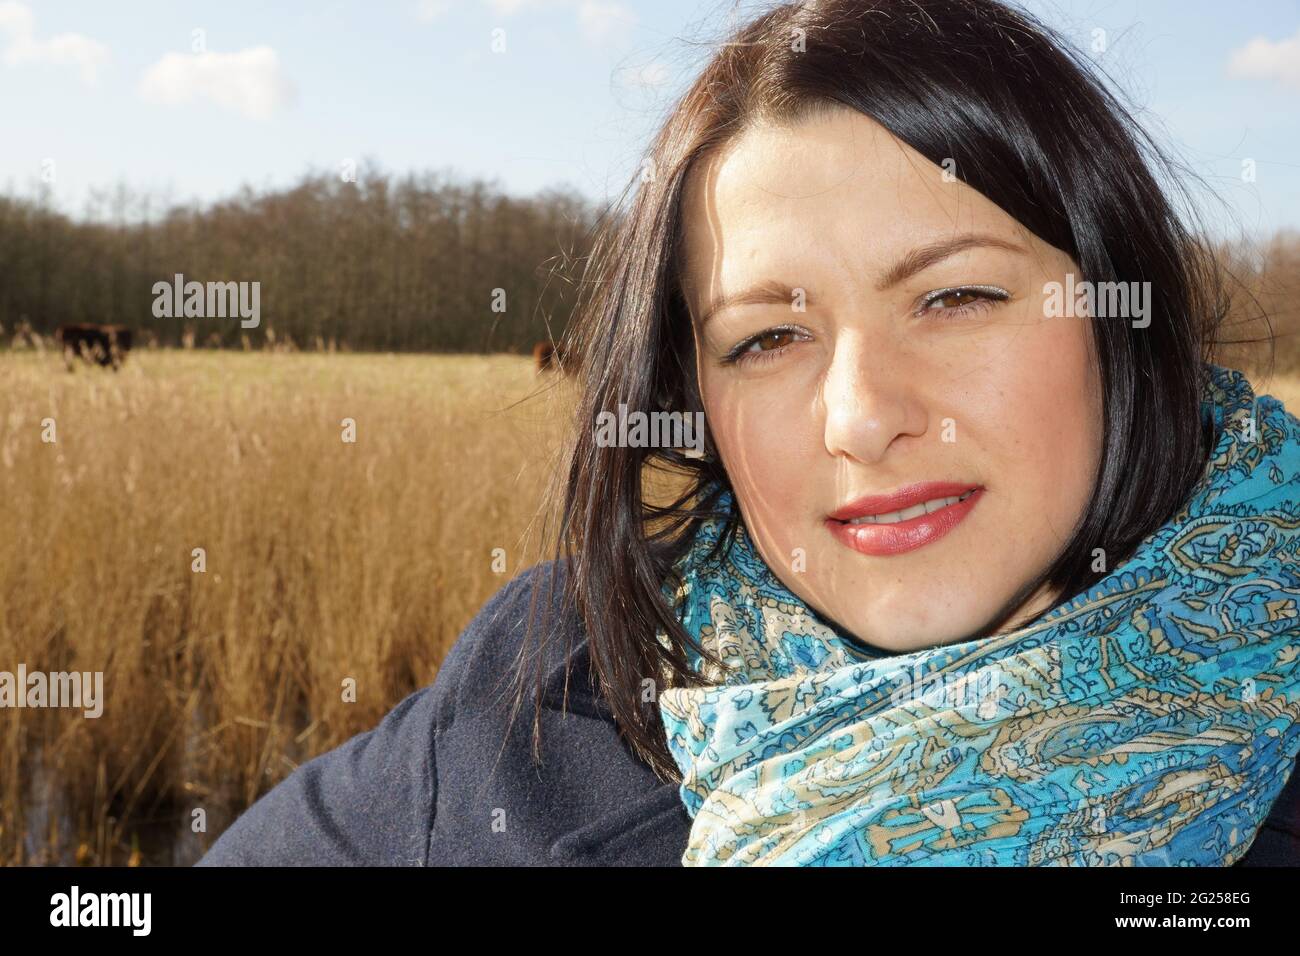 Smiling Netherlandian brunette with a blue scarf posing with a field on the background Stock Photo